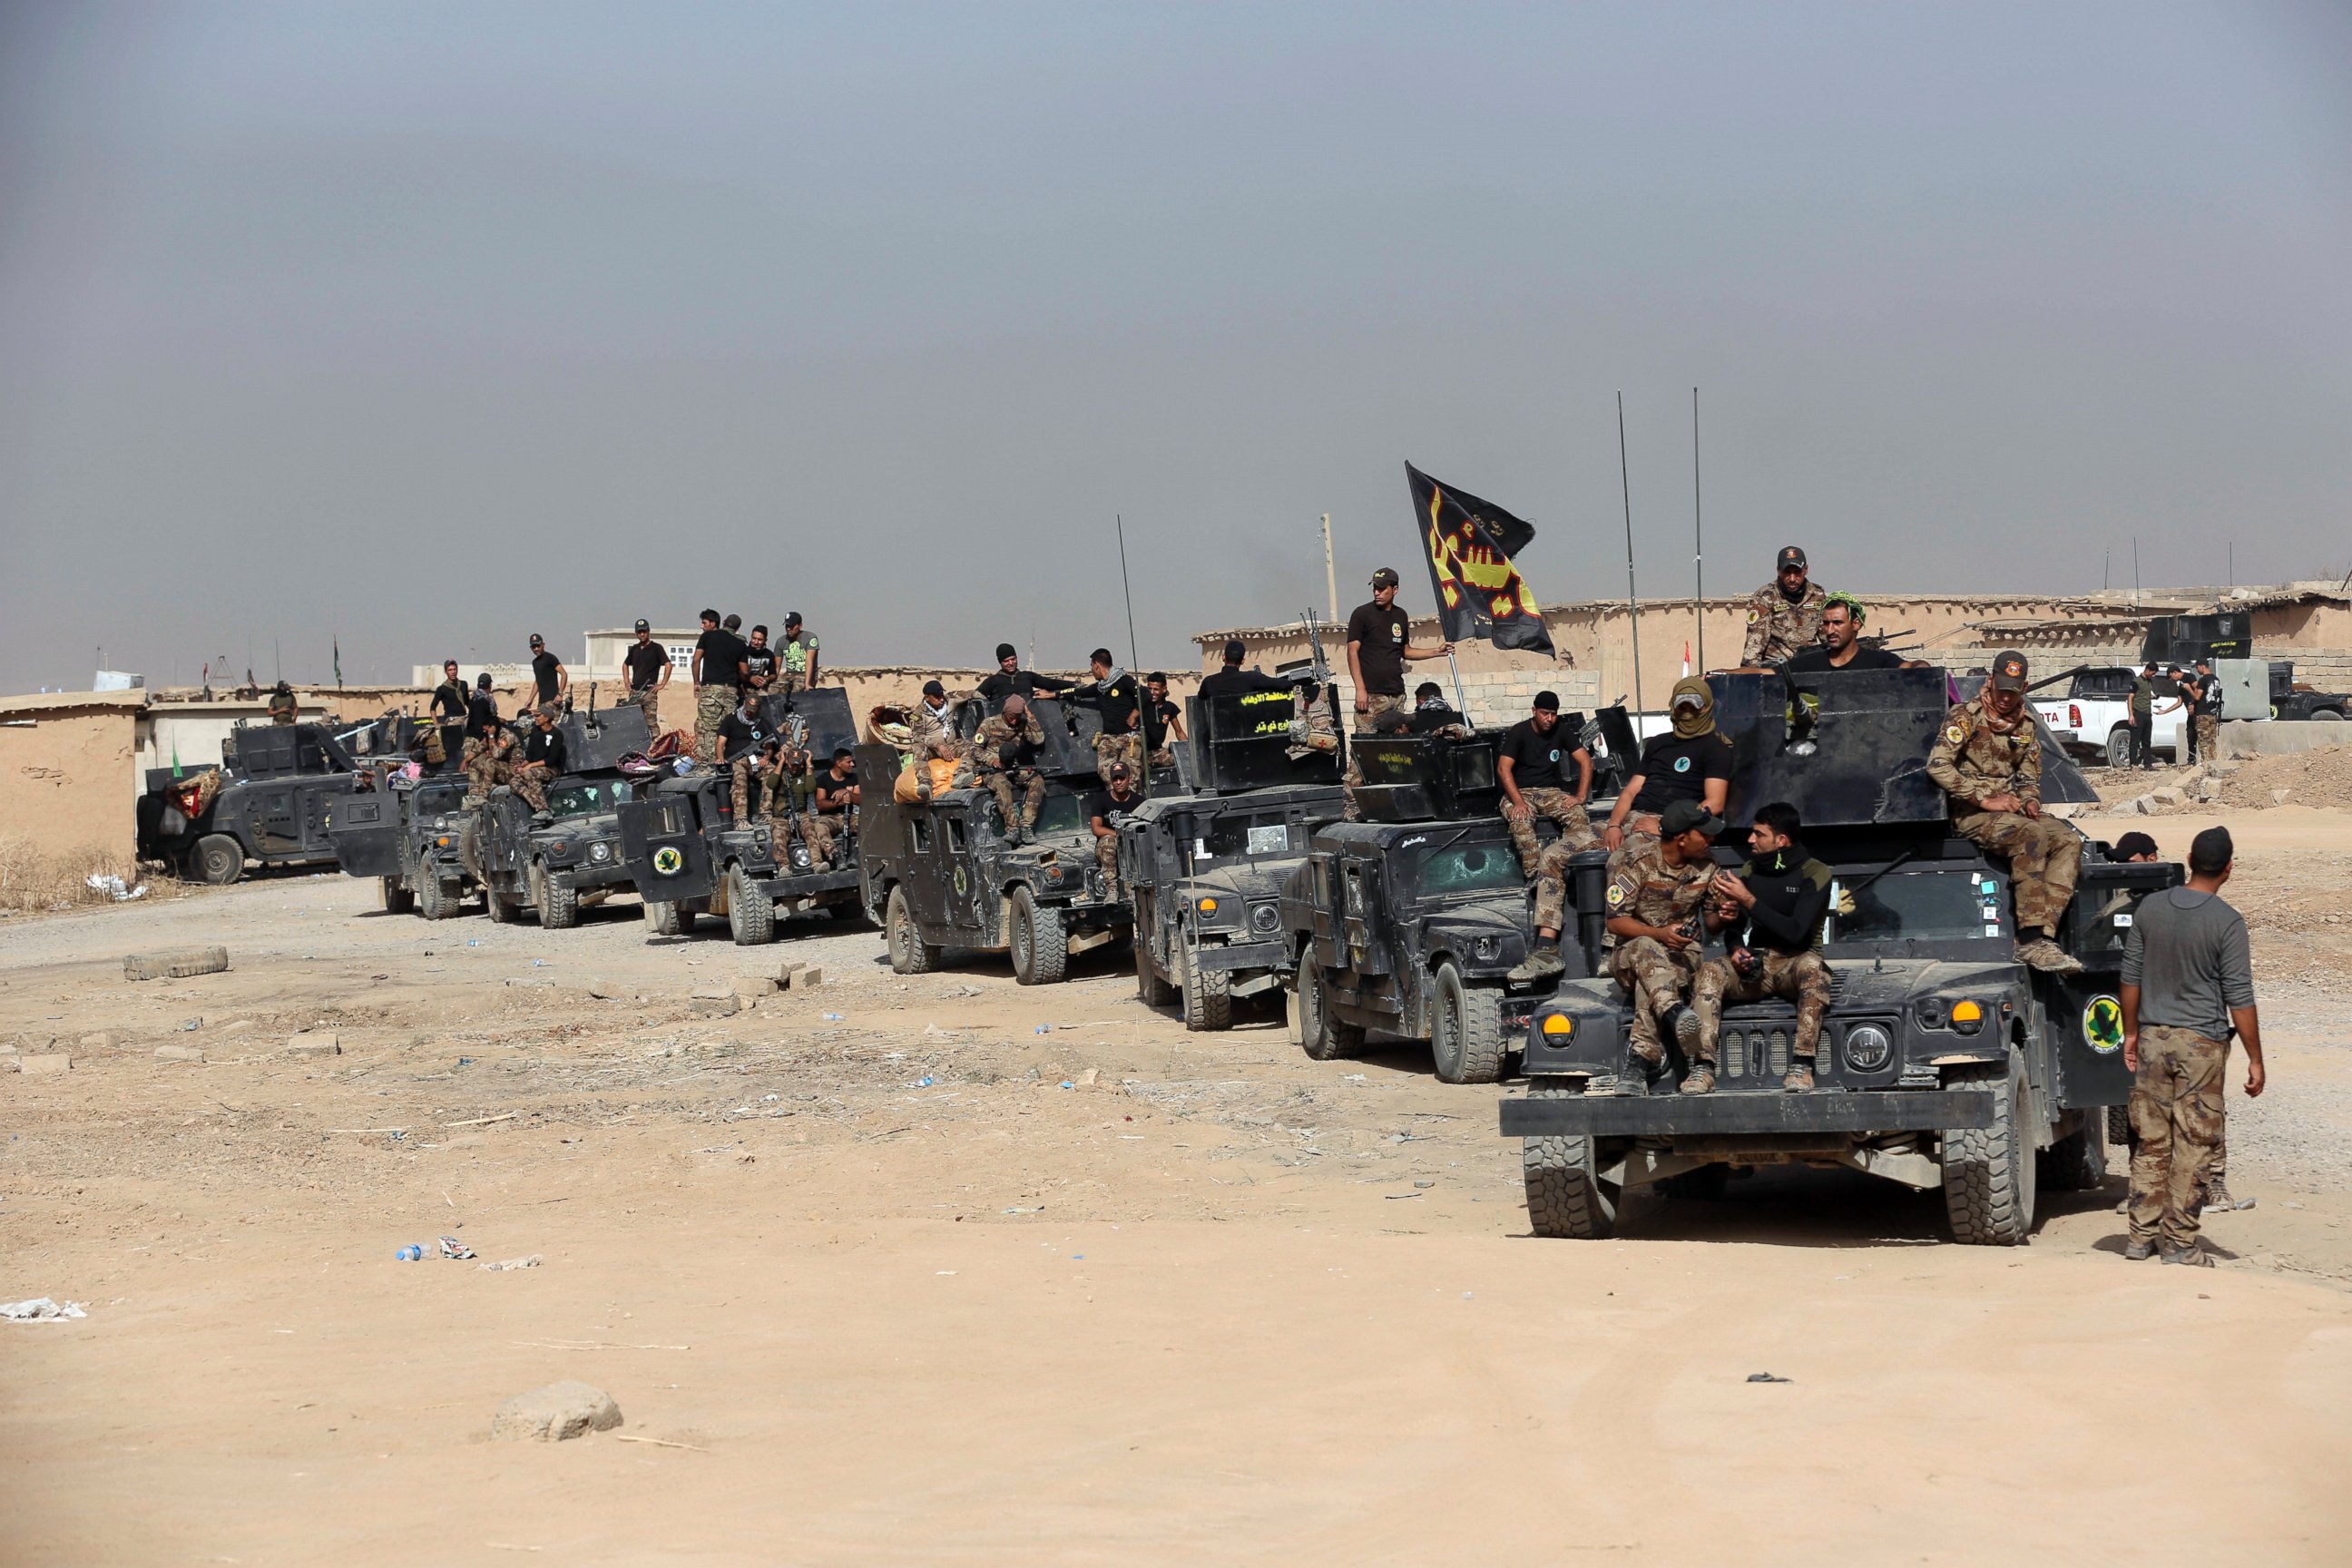 PHOTO: In this Saturday, Oct. 15, 2016 file photo, Iraq's elite counterterrorism forces gather ahead of an operation to re-take the Islamic State-held City of Mosul, outside Irbil, Iraq.